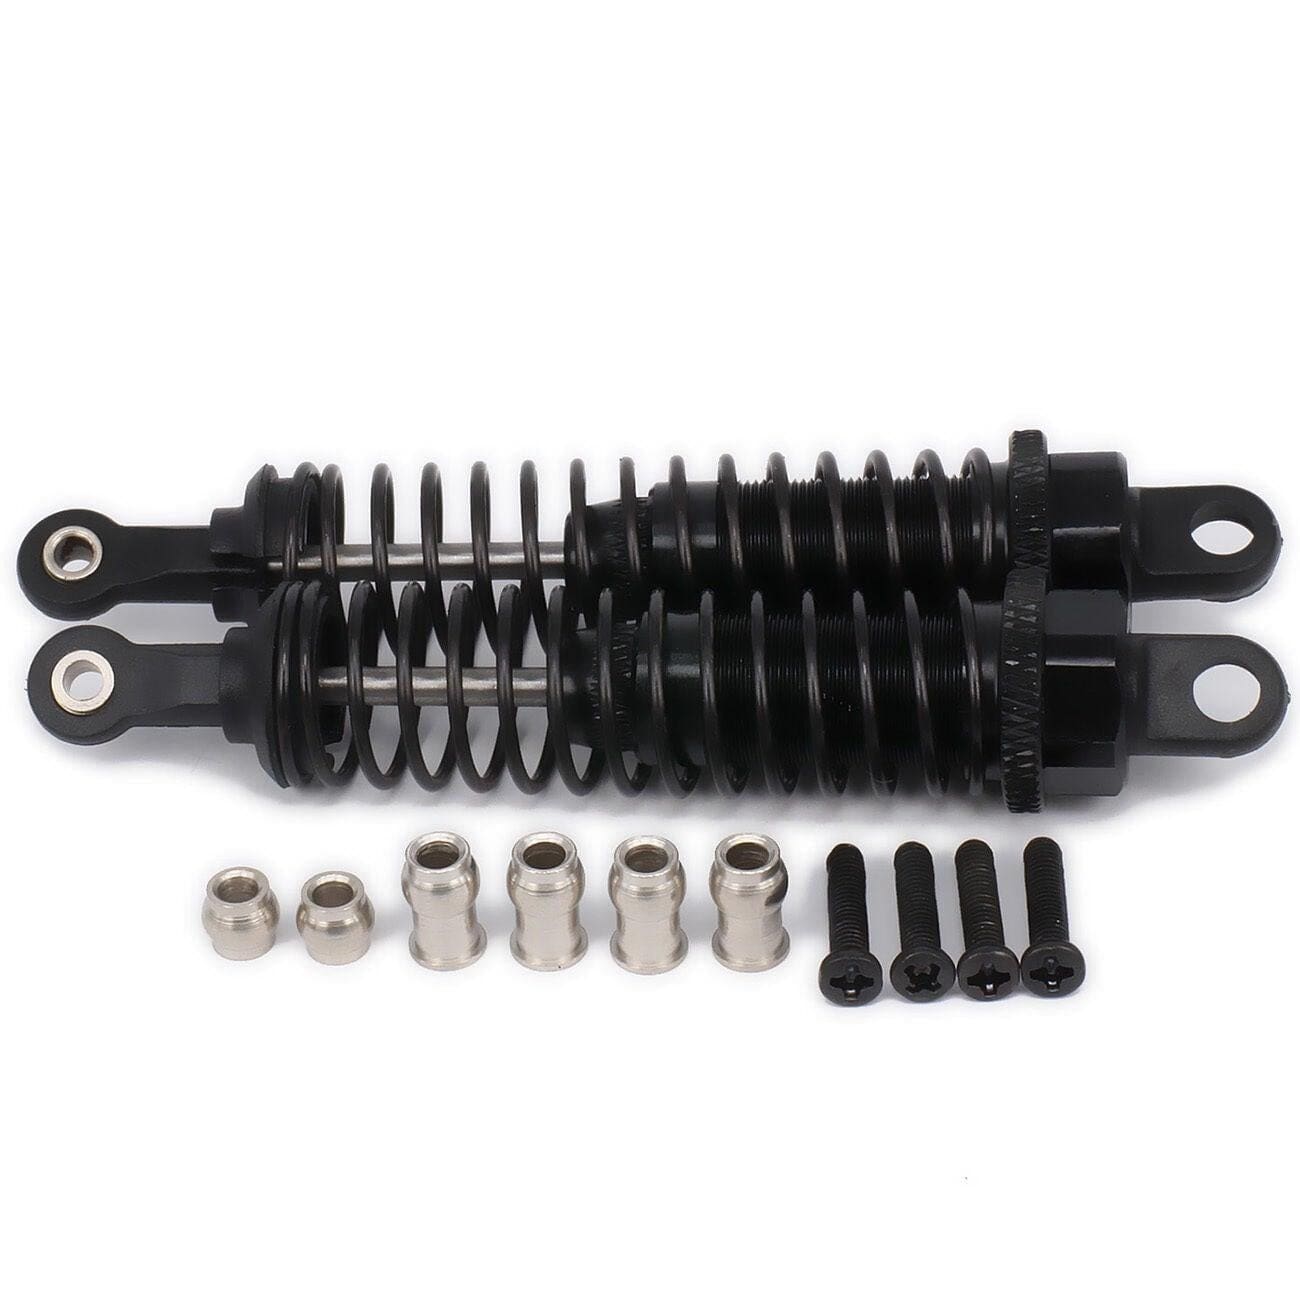 RCAWD RC CAR UPGRADE PARTS Black RCAWD 80mm Shock Absorber Damper Oil Adjustable Style for 1/16 Rc Car 2pcs